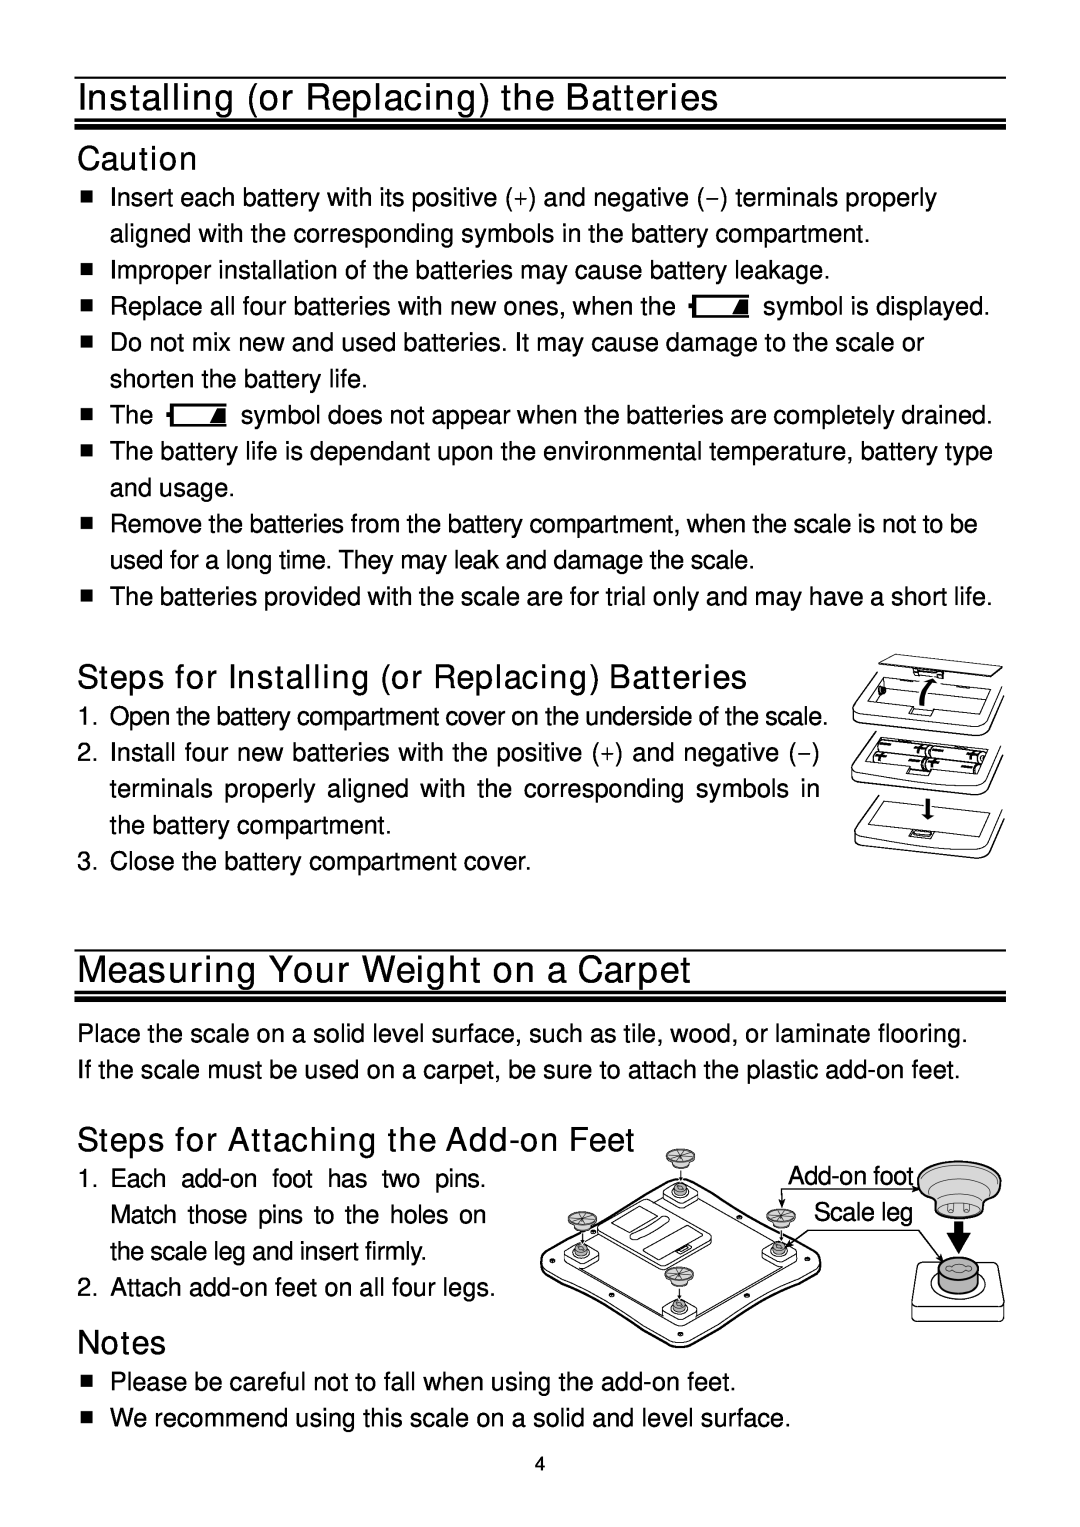 A&D UC-324NFC instruction manual Installing or Replacing the Batteries, Measuring Your Weight on a Carpet 